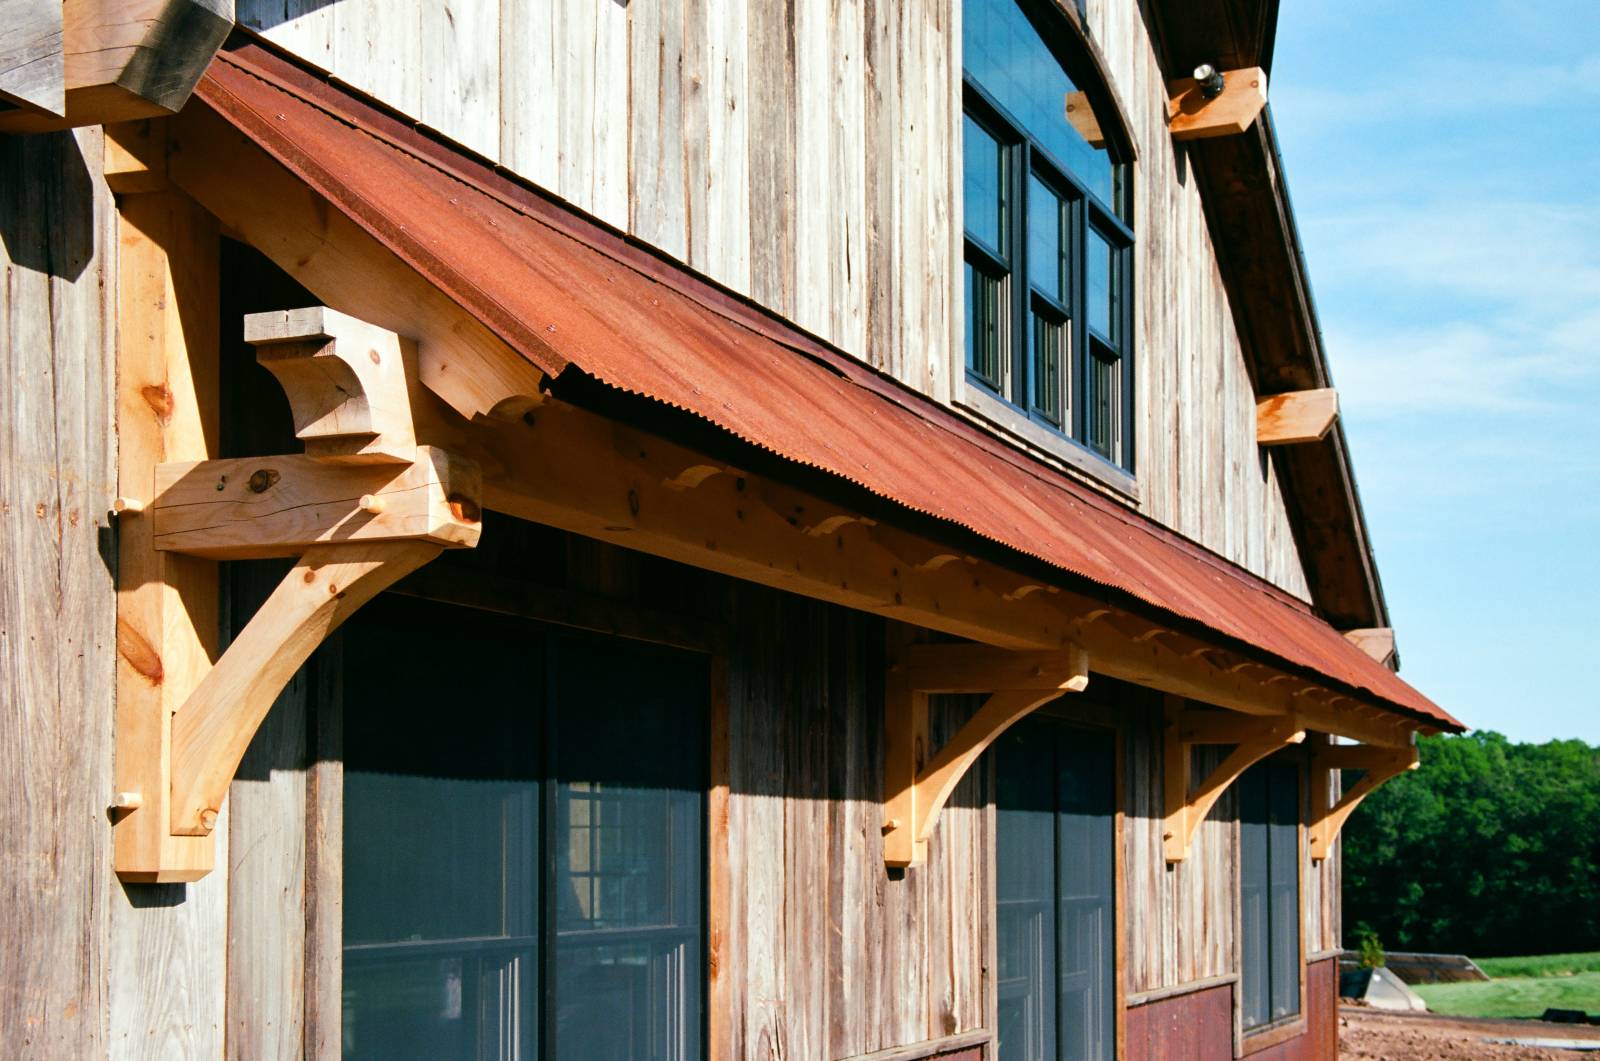 Timber Frame Eyebrow Roof with Rusty Metal Roof